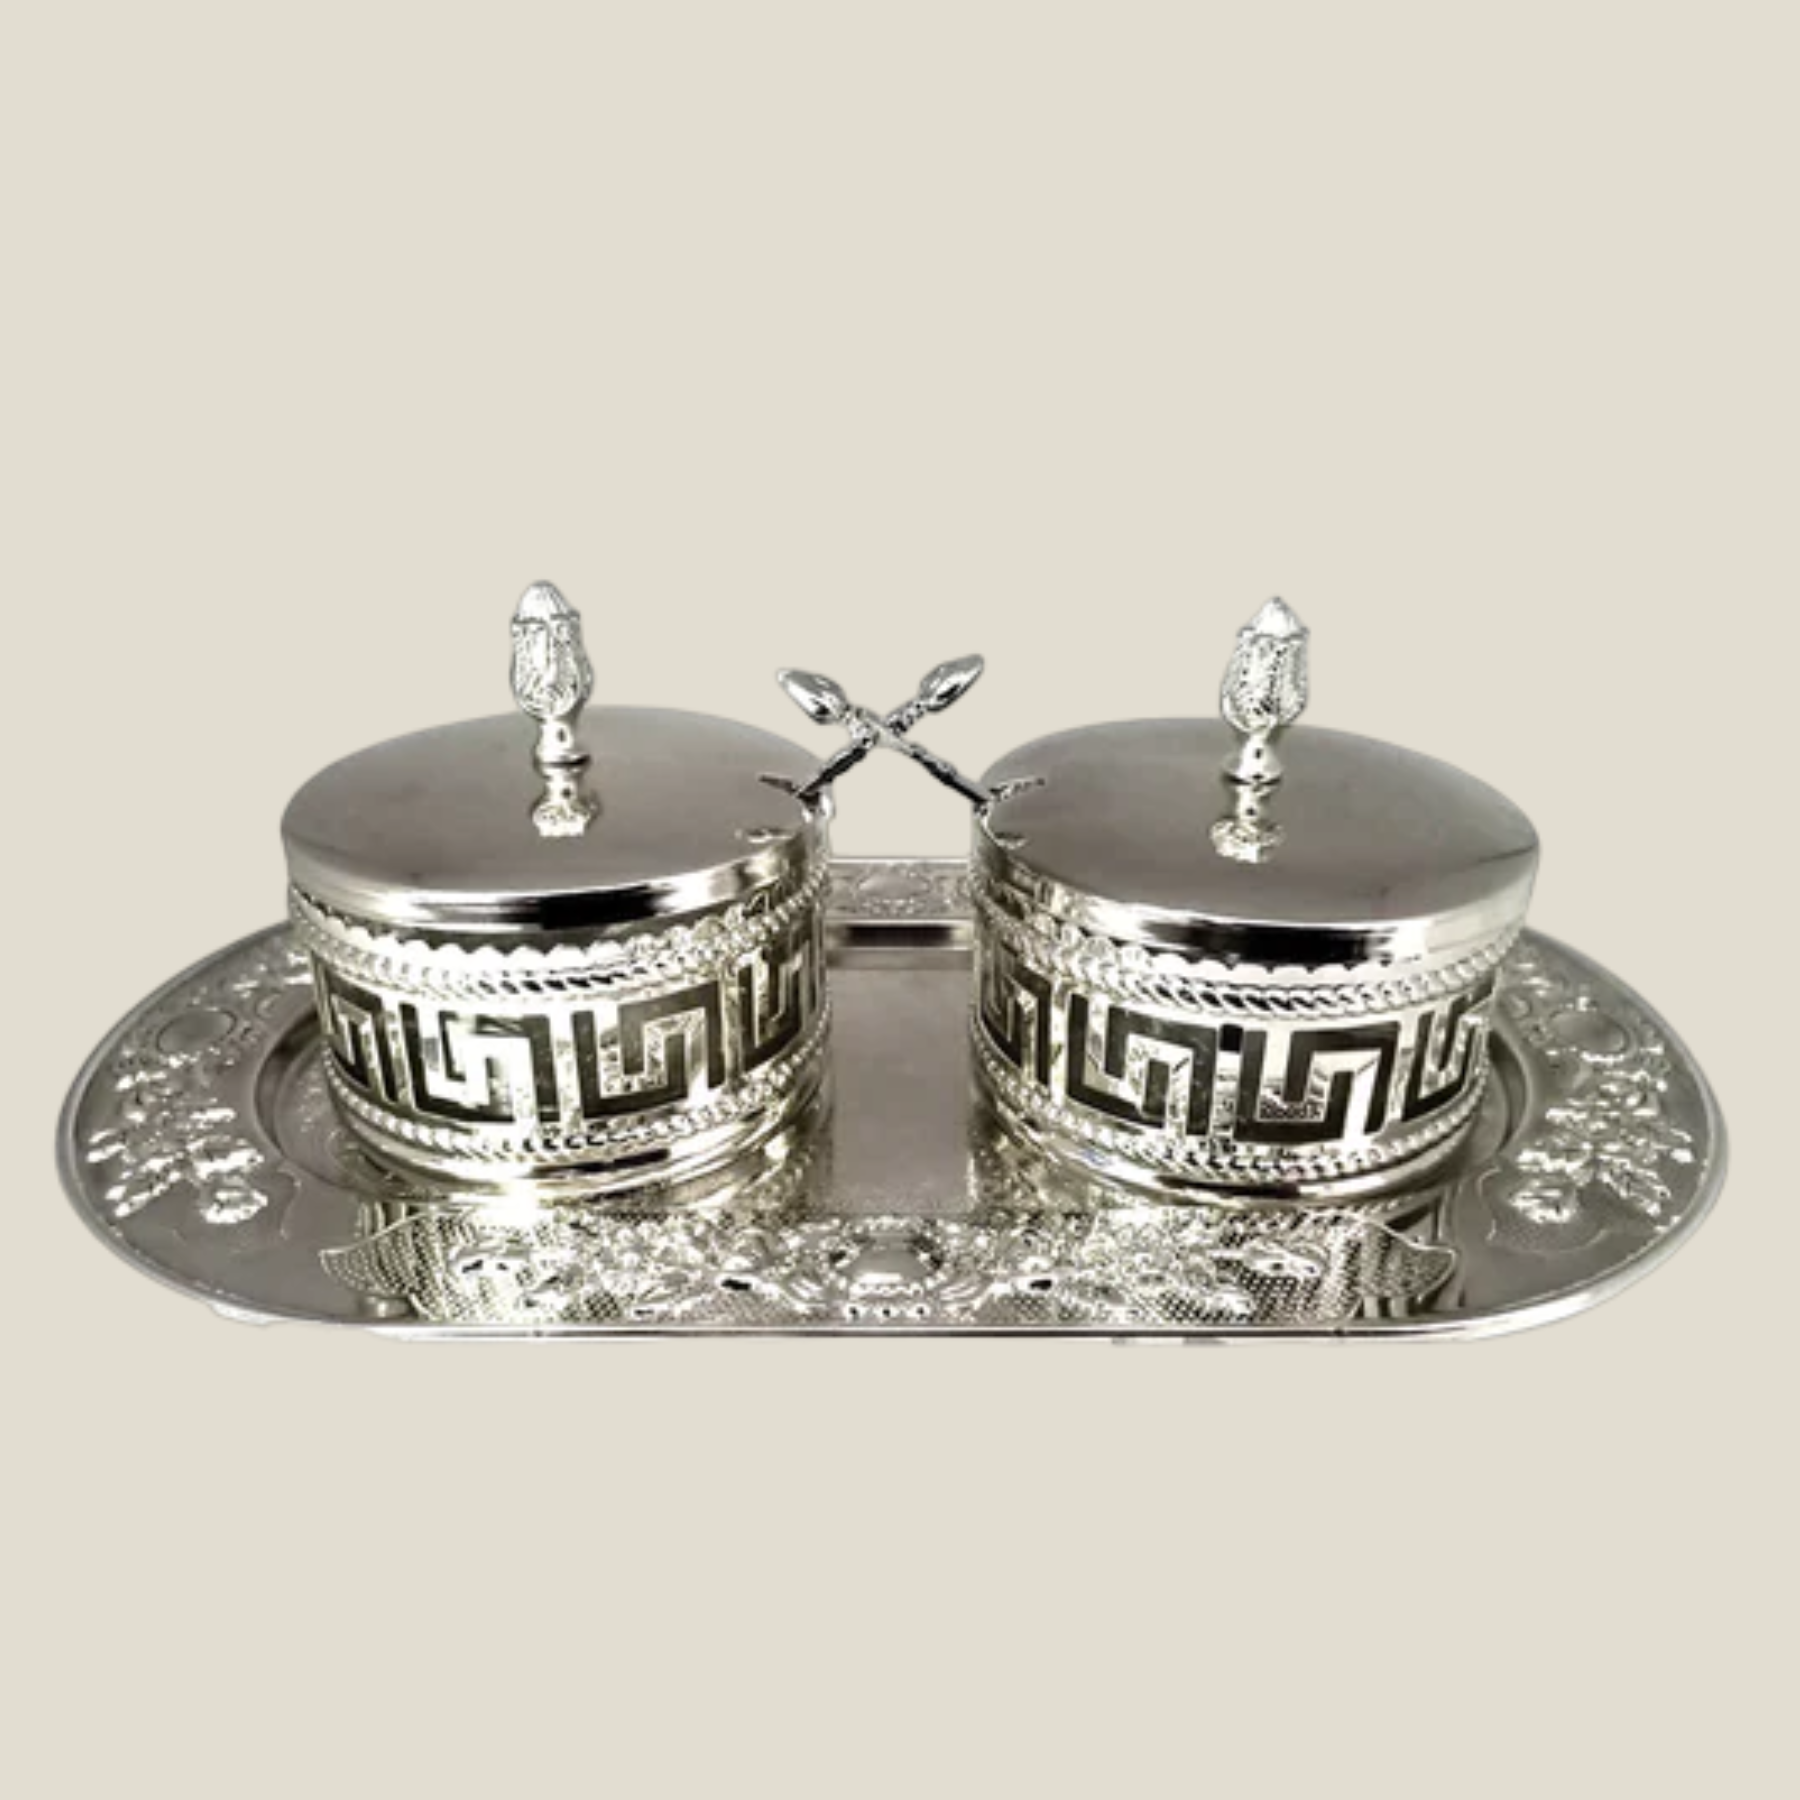 Tray With Two Sugar Pots